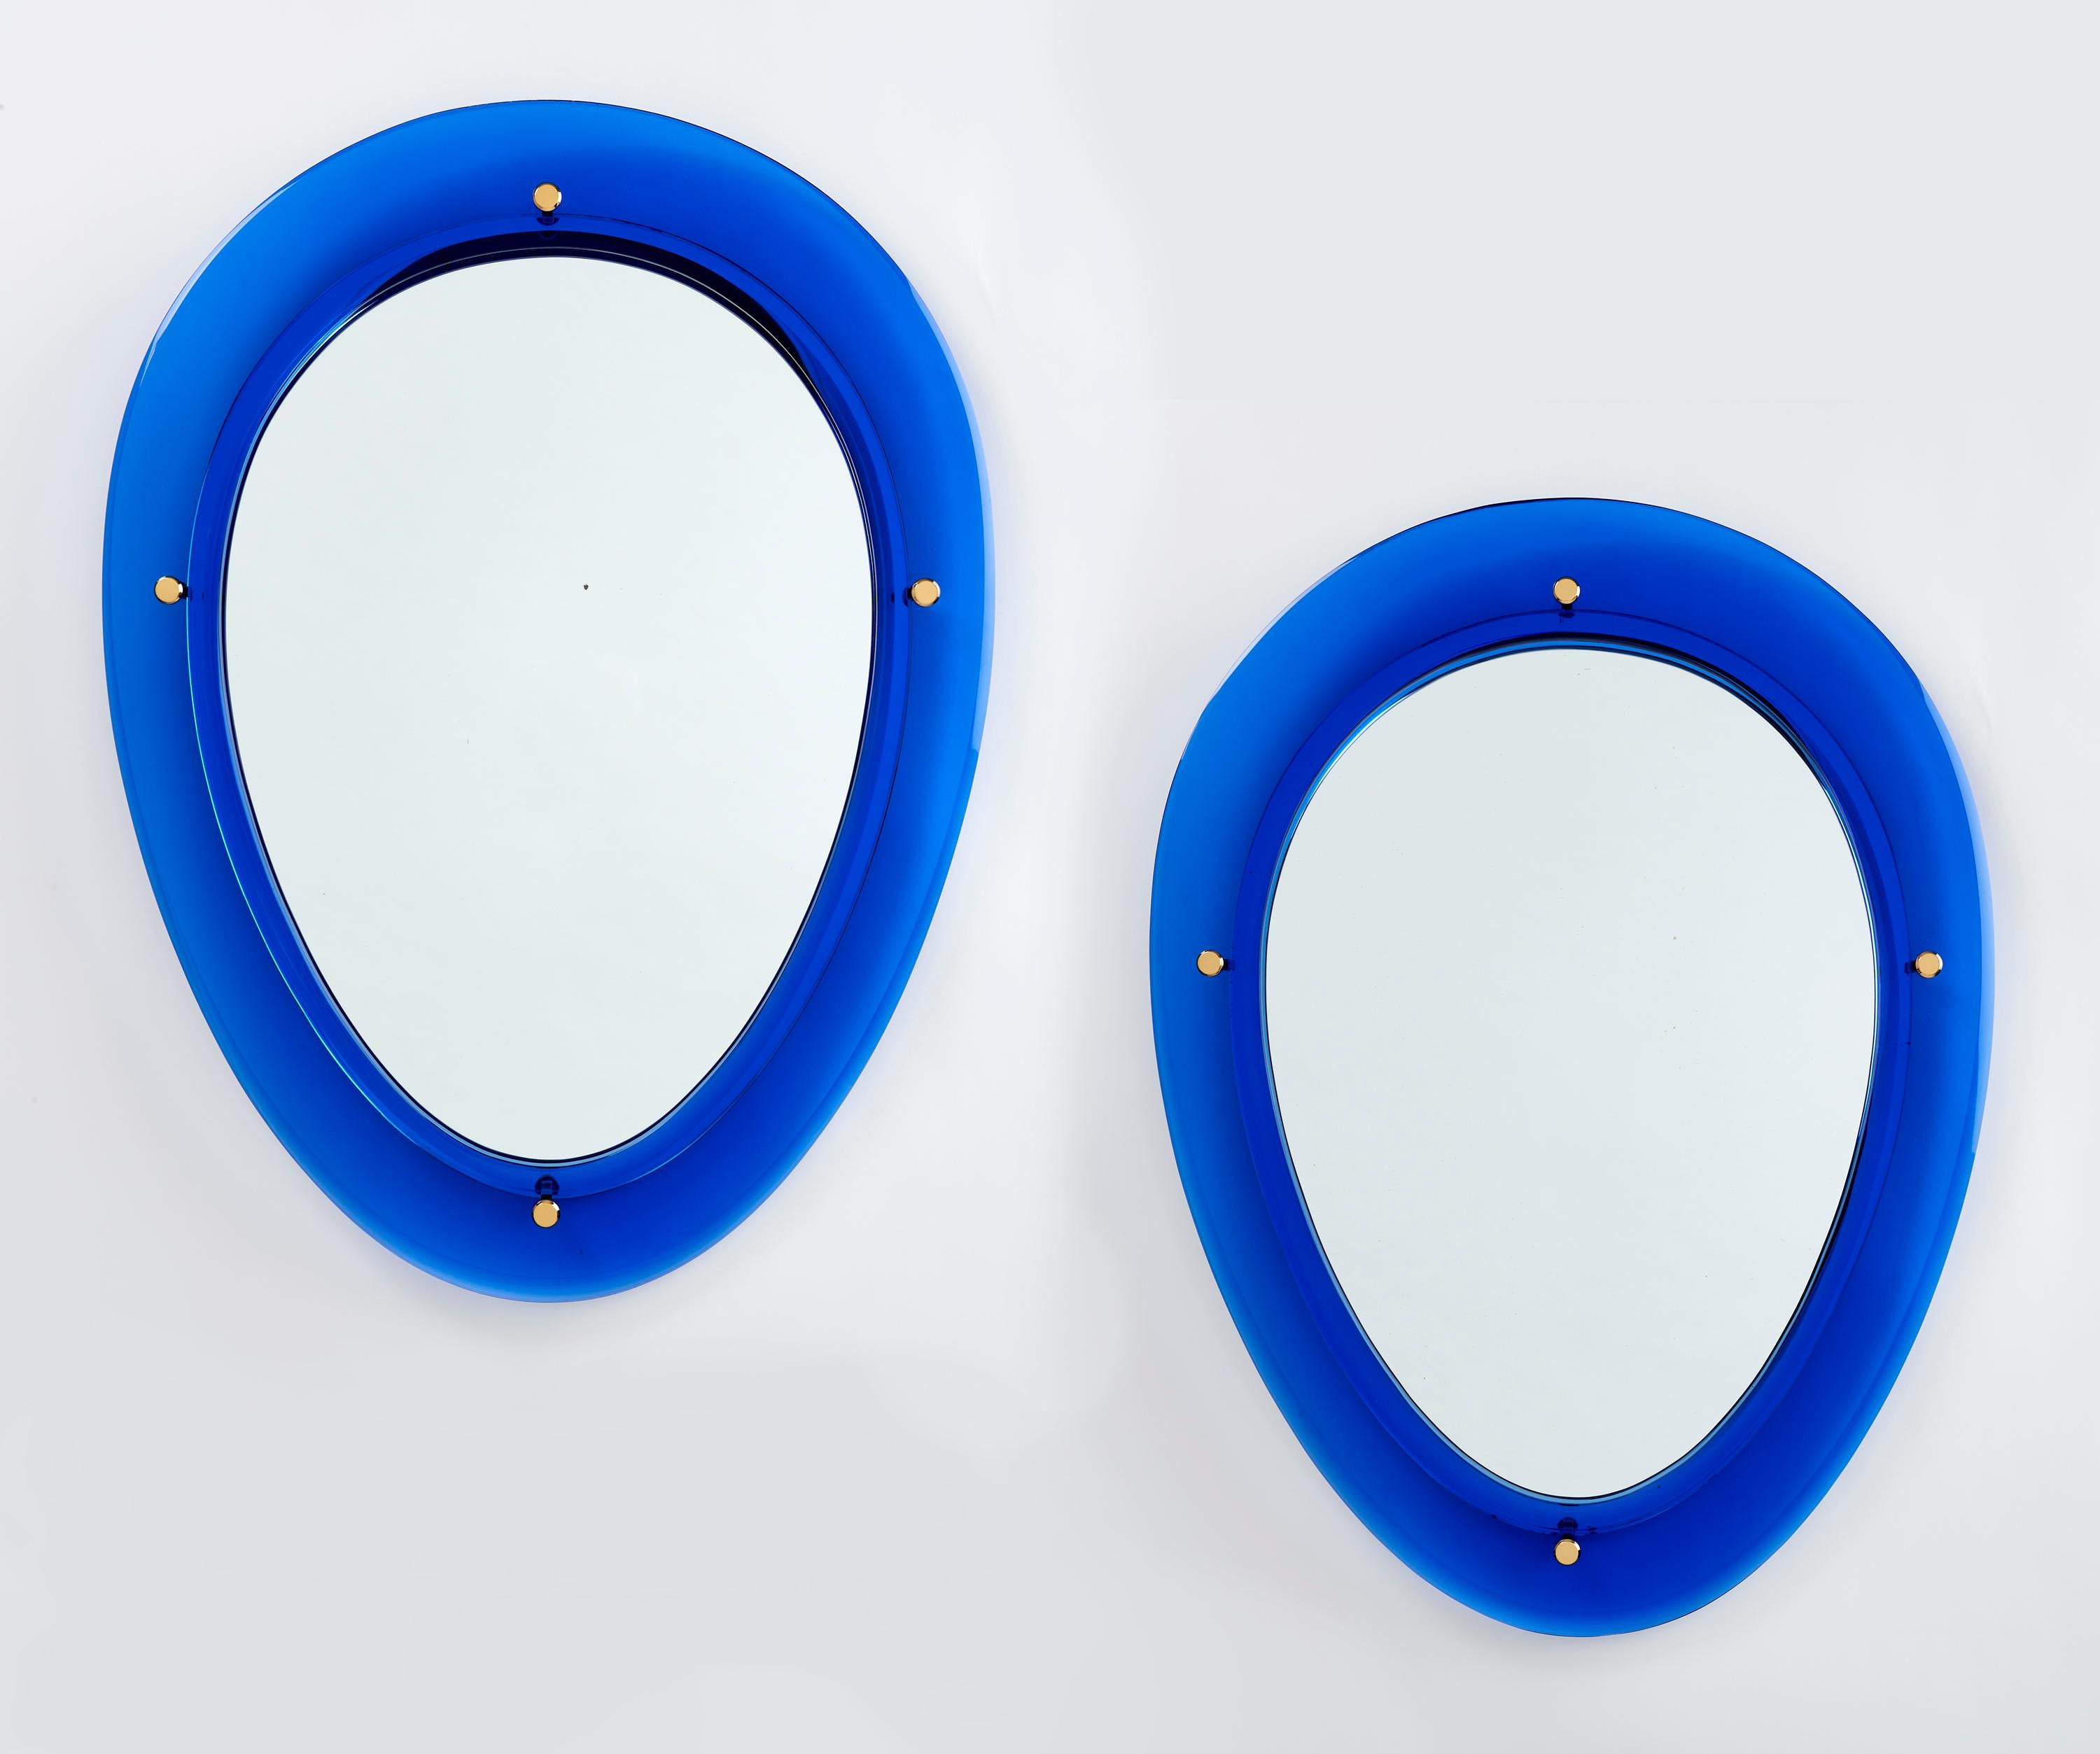 ITALY, 1960s
Pair of oval shaped blue glass mirrors, with nicely beveled glass frames and four polished brass mounts.
SOLD and PRICED INDIVIDUALLY. ONE MIRROR AVAILABLE, ONE ON HOLD
Dimensions: 33 H x 25 W x 2 D.


